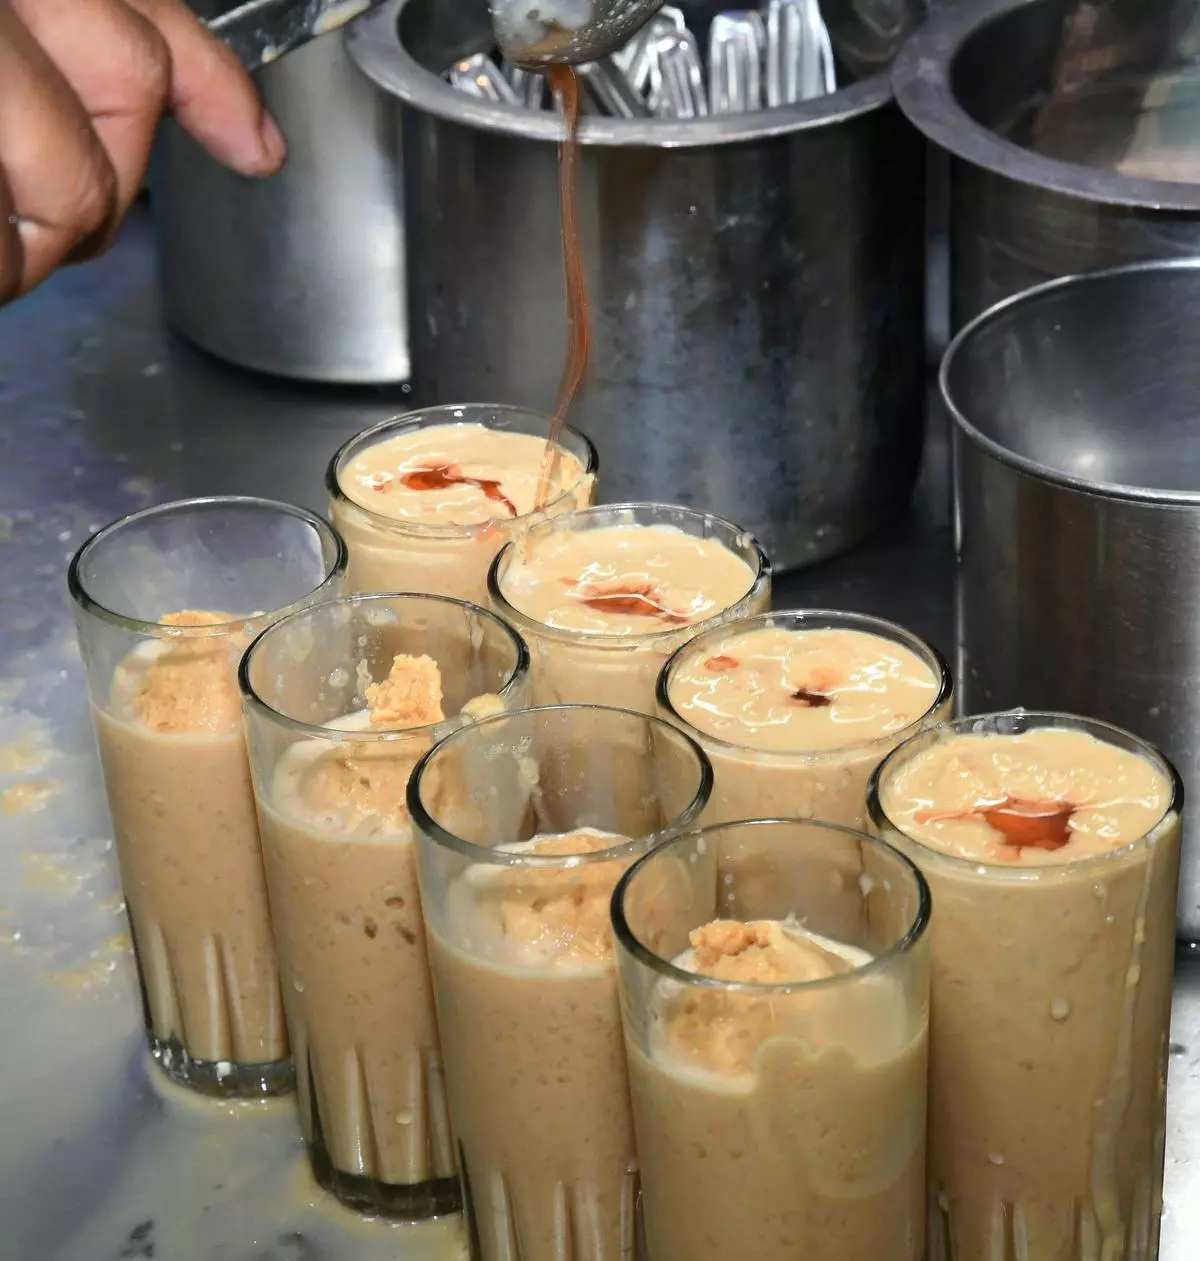 The ingredients that go into the making of Jigarthanda are milk, almond pisin, basundi, ice cubes and sherbet